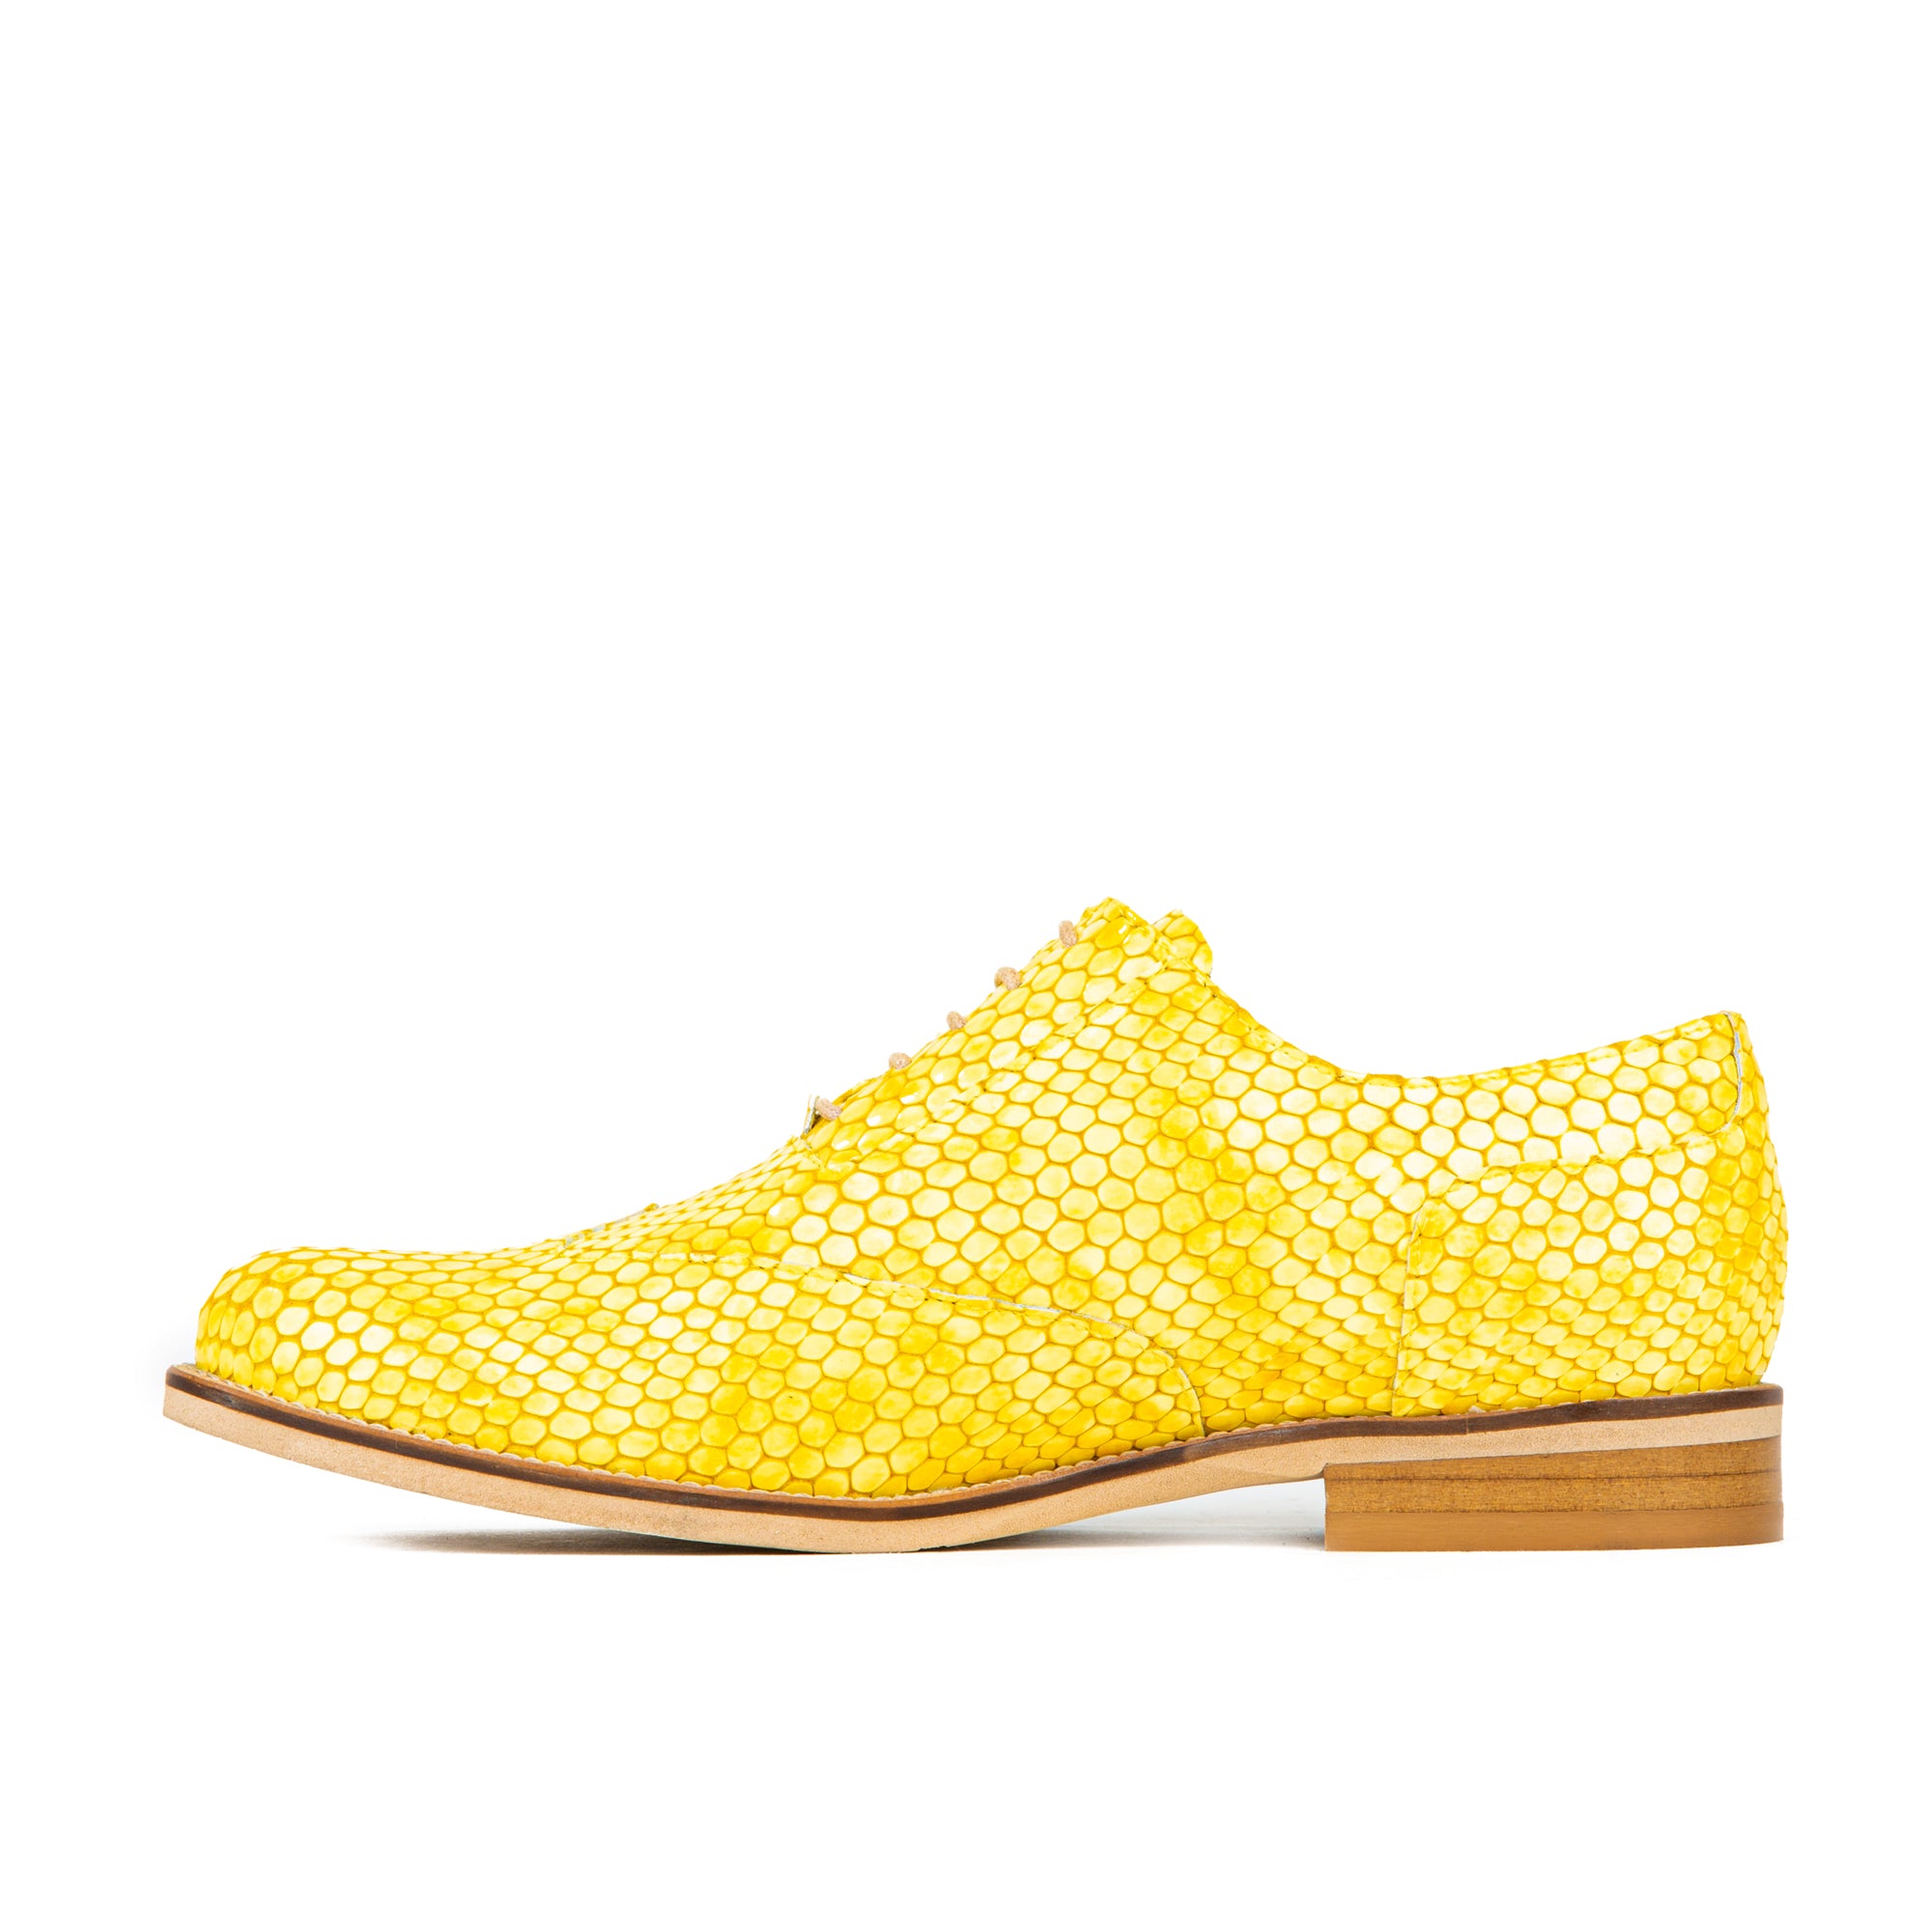 Embassy London Vivienne 7377294 Ladies Yellow Snake Lace Up Shoes